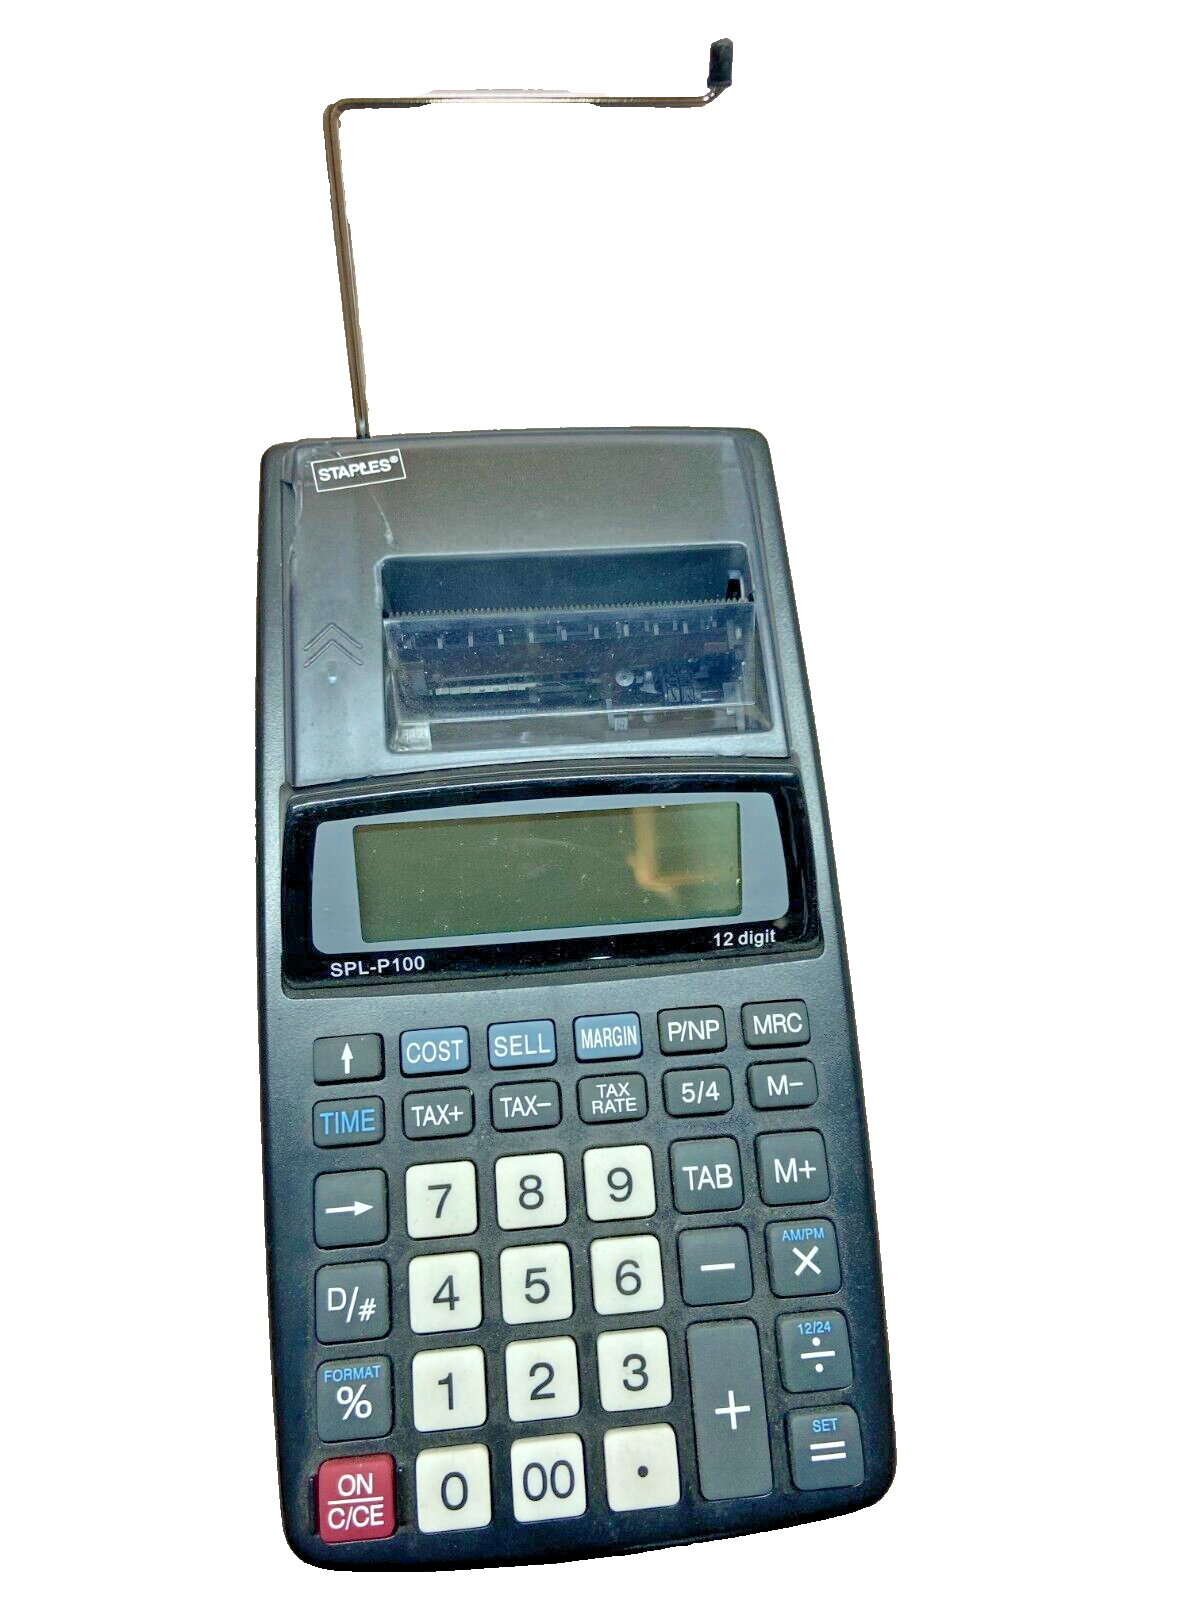 Primary image for Staples SPL-P100 Calculator -USED -WORKING